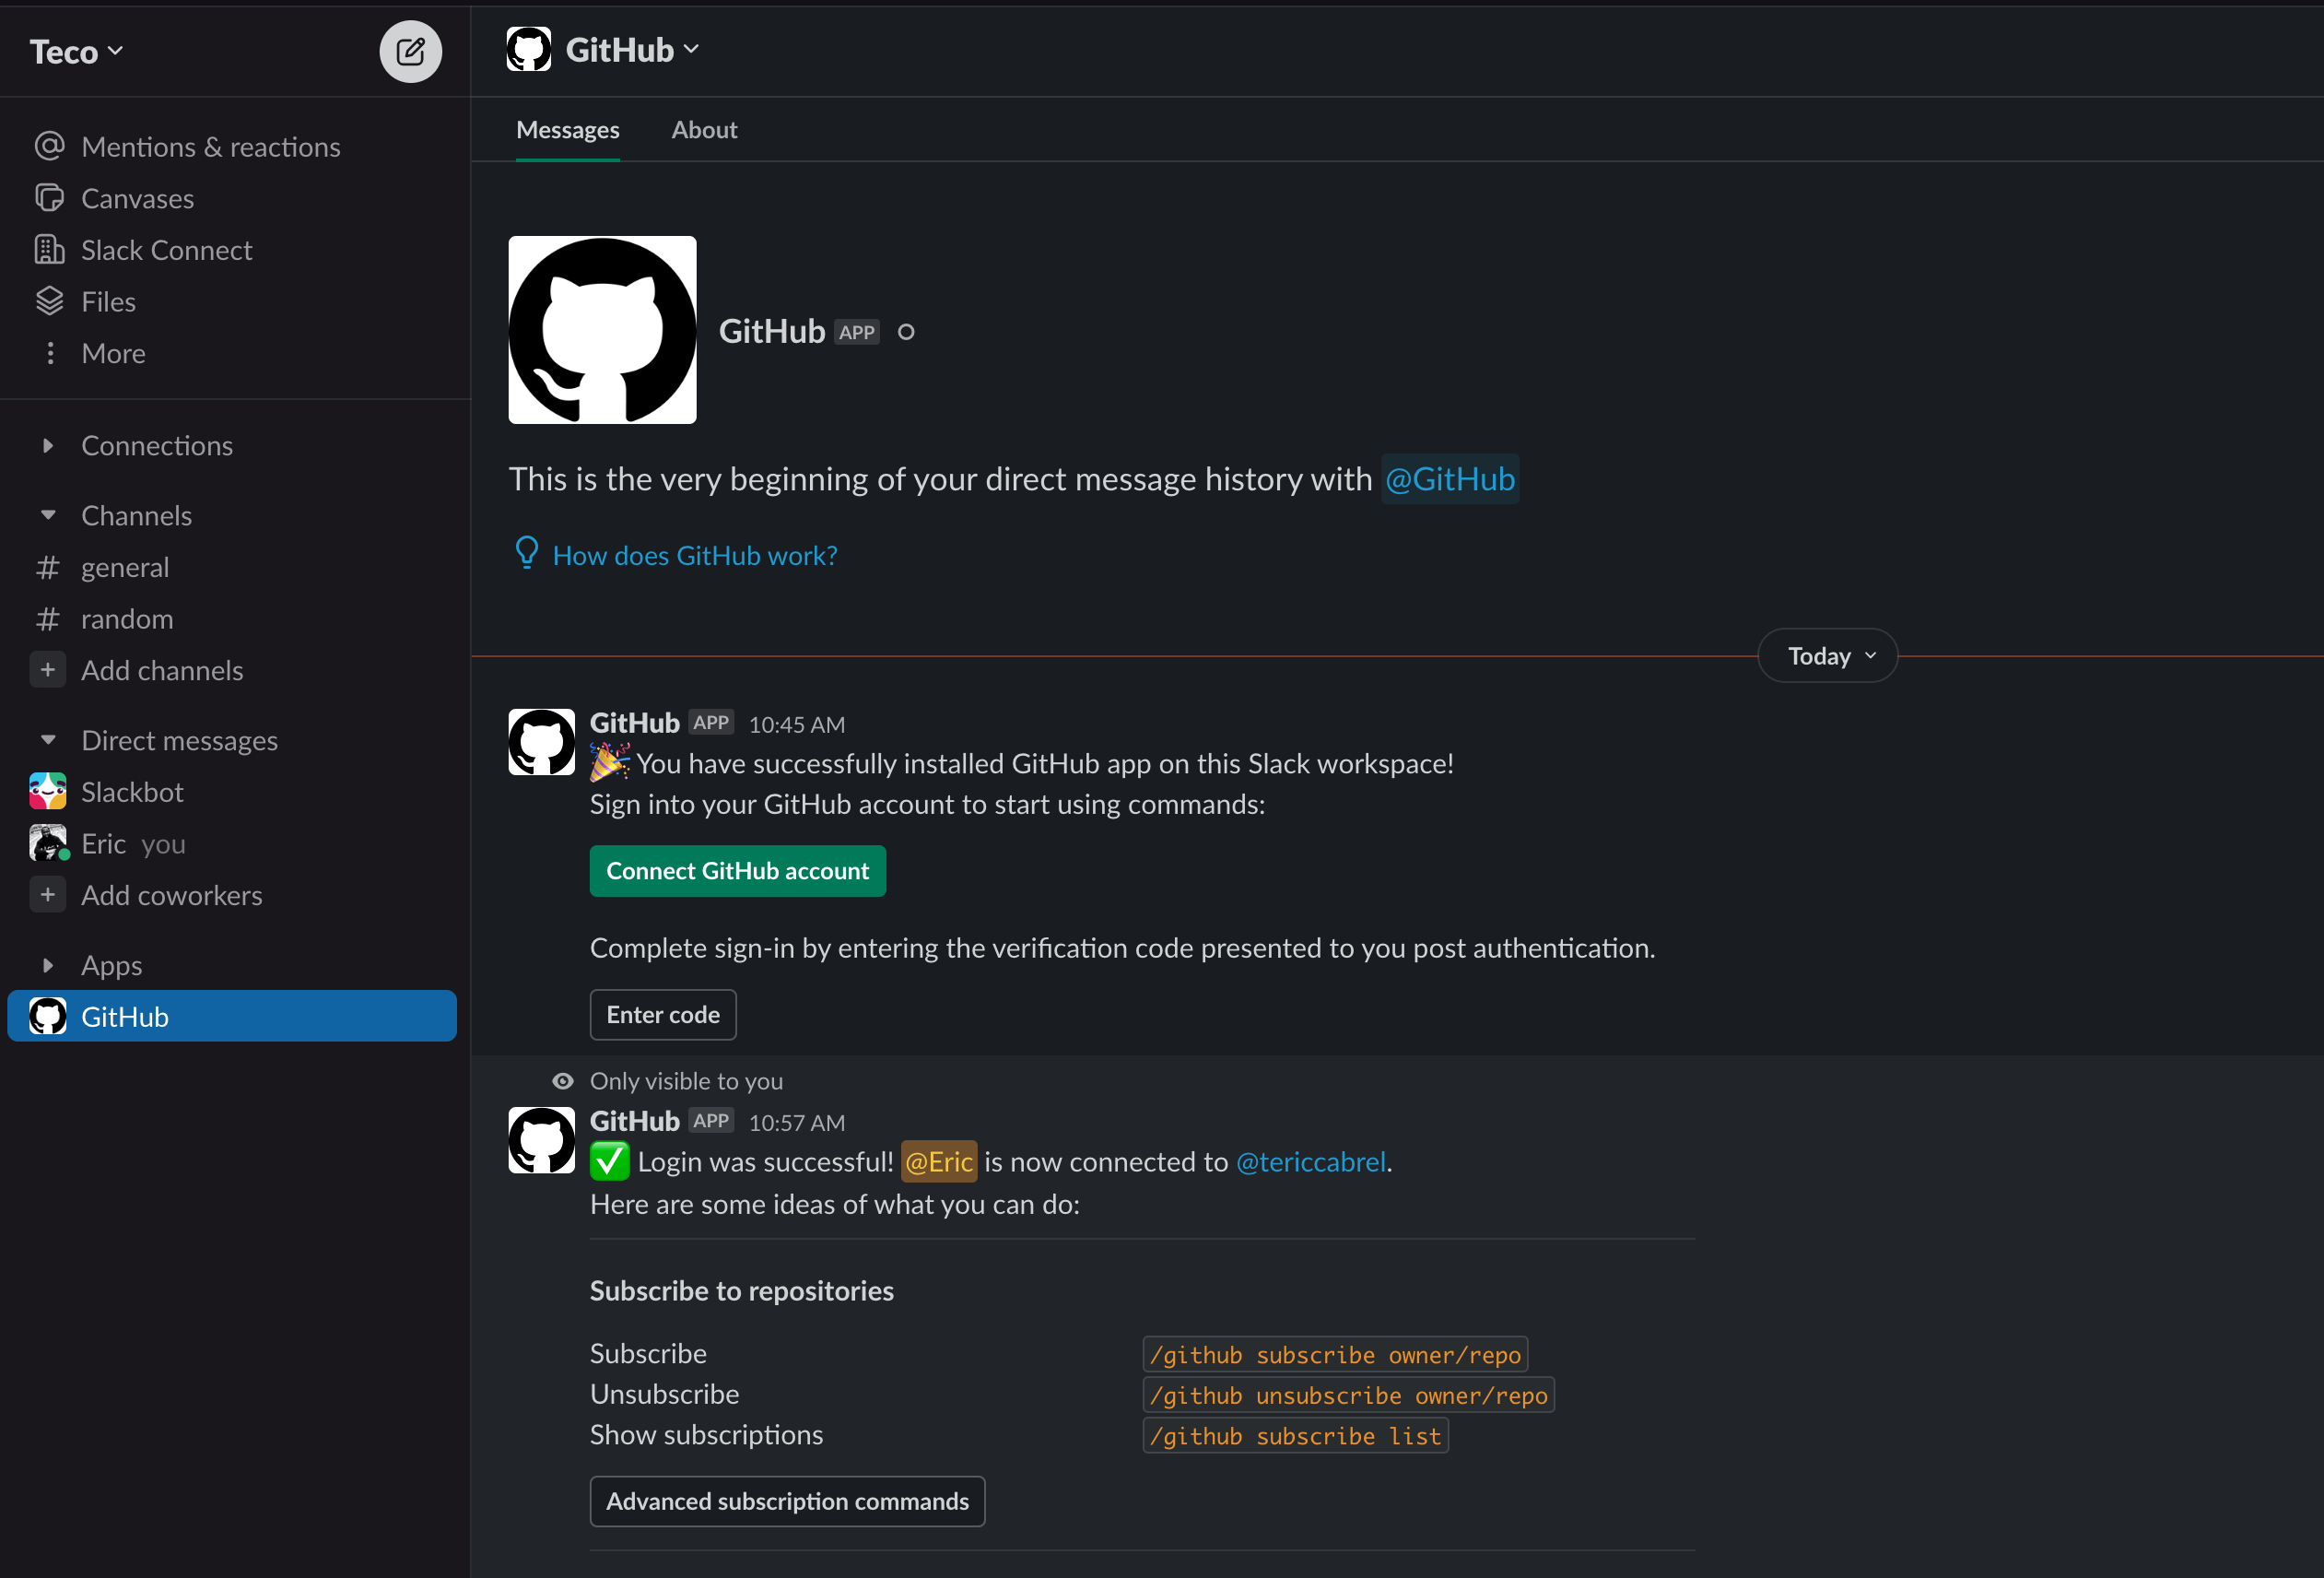 The GitHub account is successfully connected.